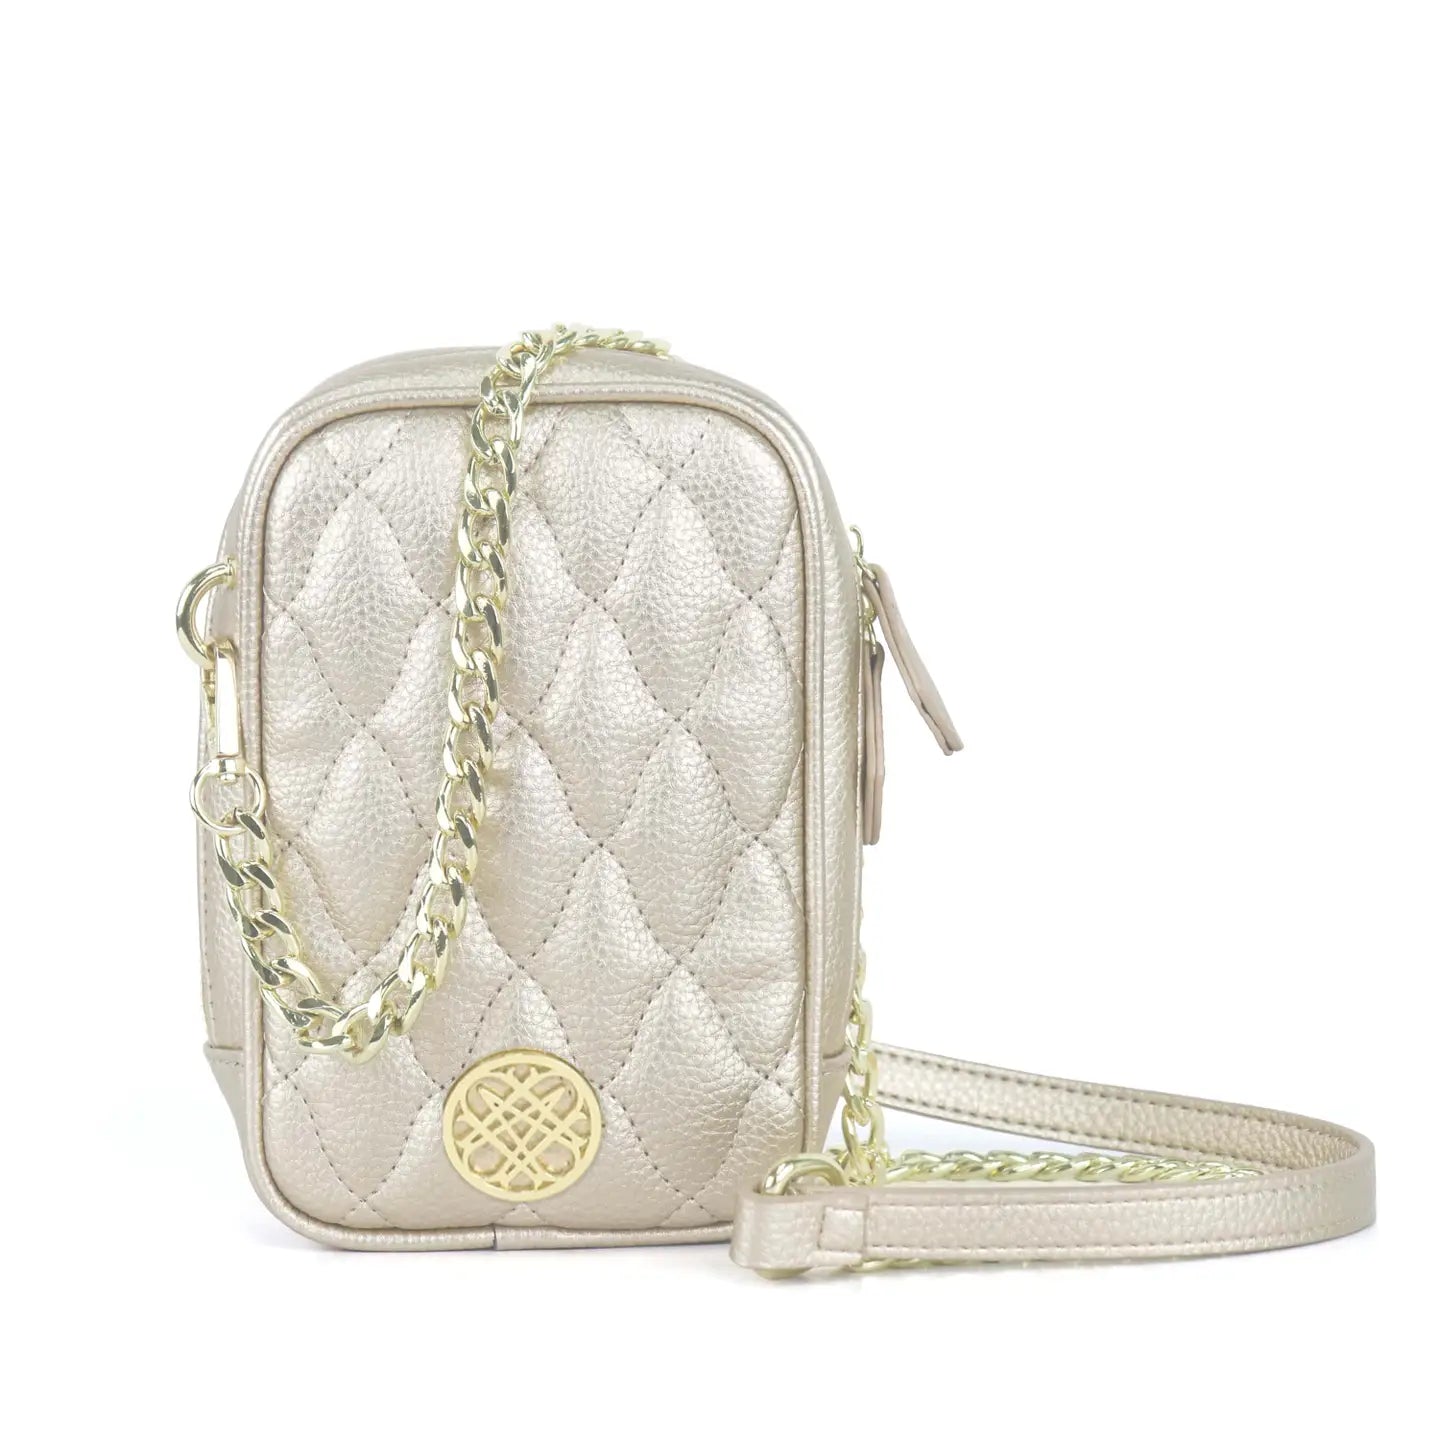 Natalie Wood - Grace Crossbody in Gold Metallic-130 Accessories-Natalie Wood-July & June Women's Fashion Boutique Located in San Antonio, Texas